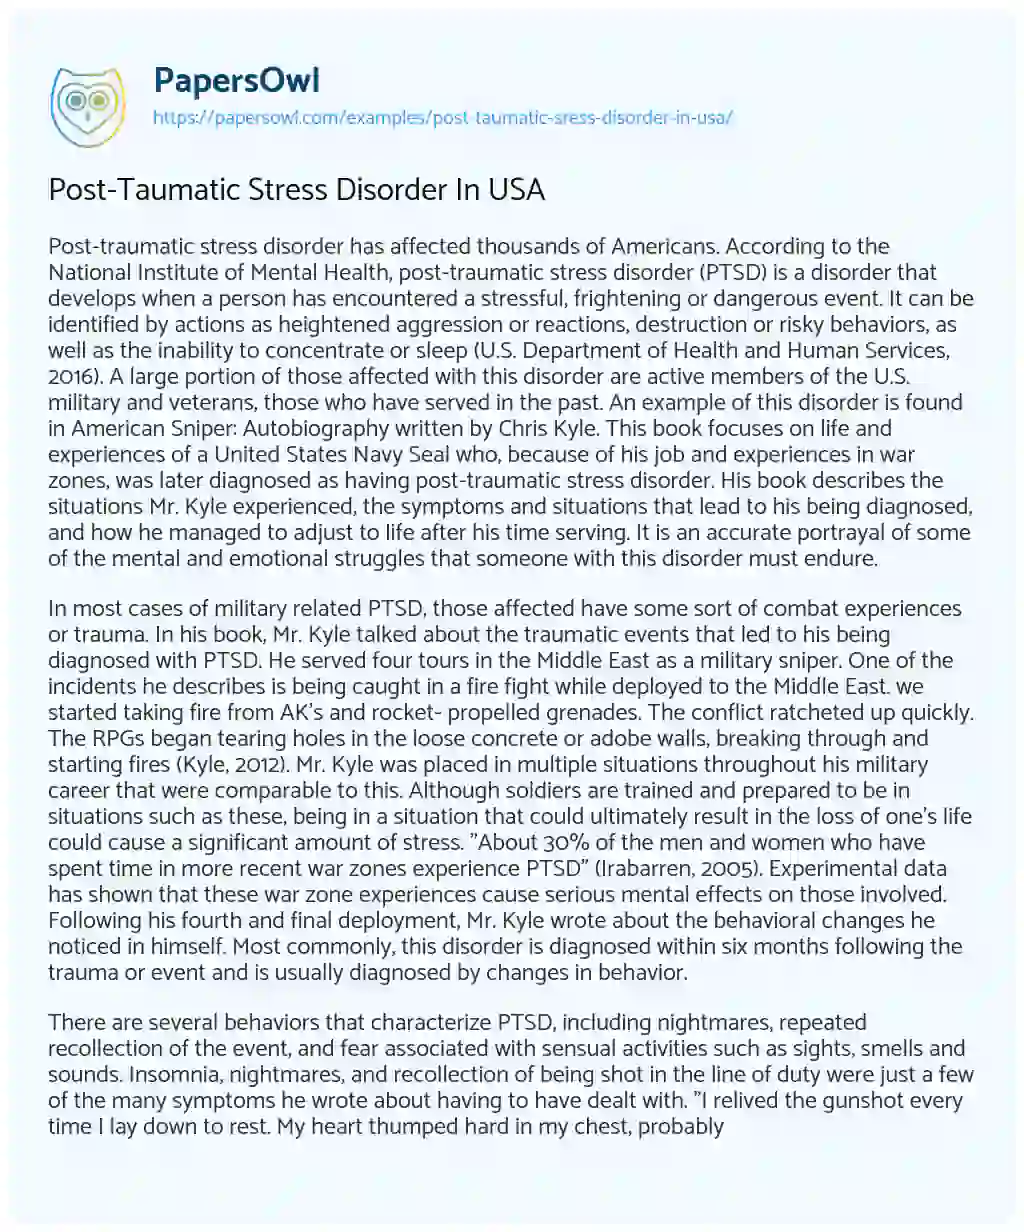 Essay on Post-Taumatic Stress Disorder in USA